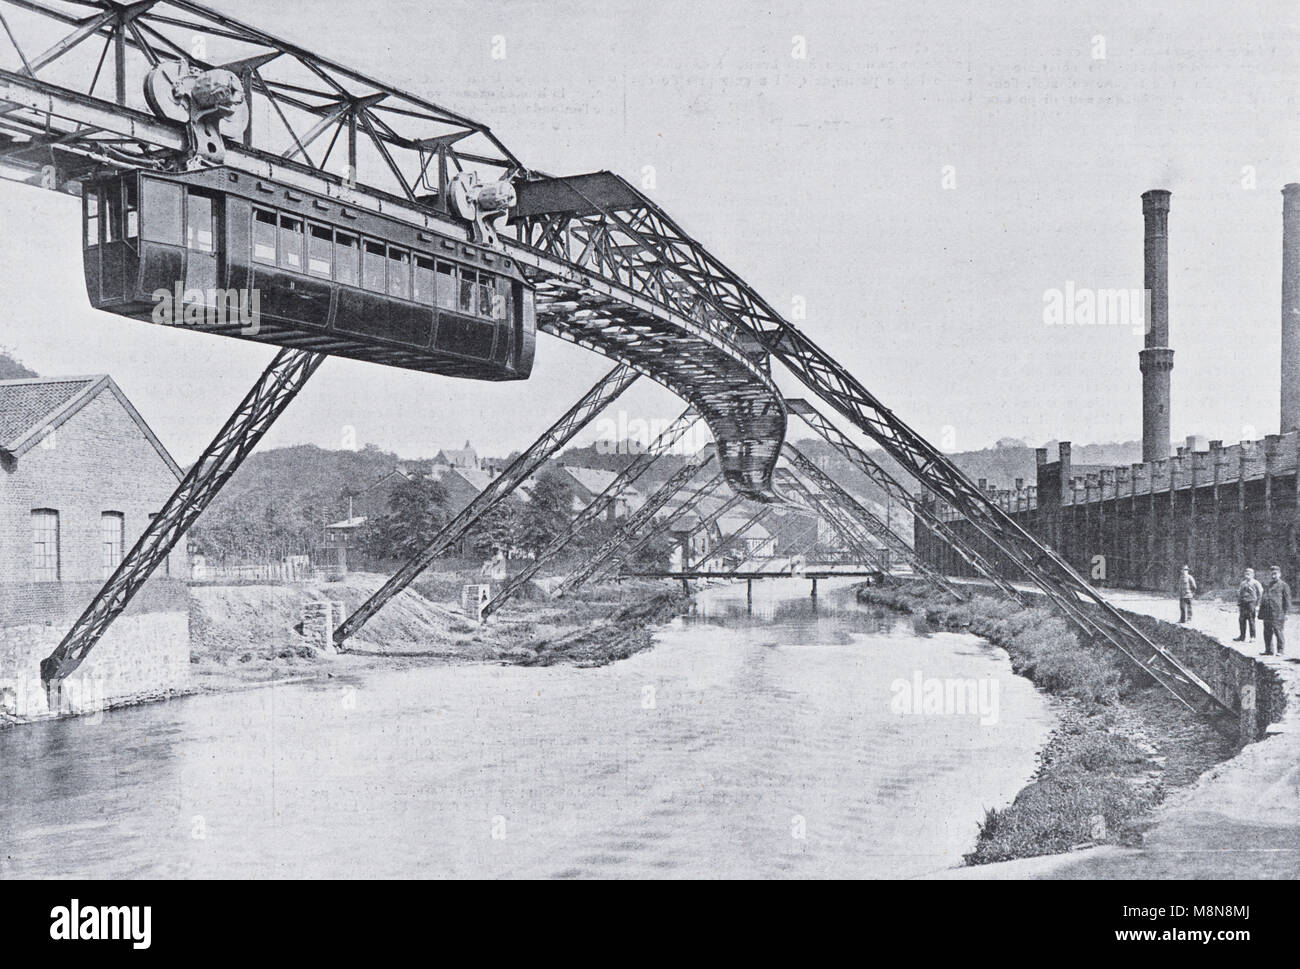 Wuppertal-Barmen-Elberfeld Suspension Railway, Ruhr region, Germany,  Picture from the French weekly newspaper l'Illustration, 20th October 1900 Stock Photo